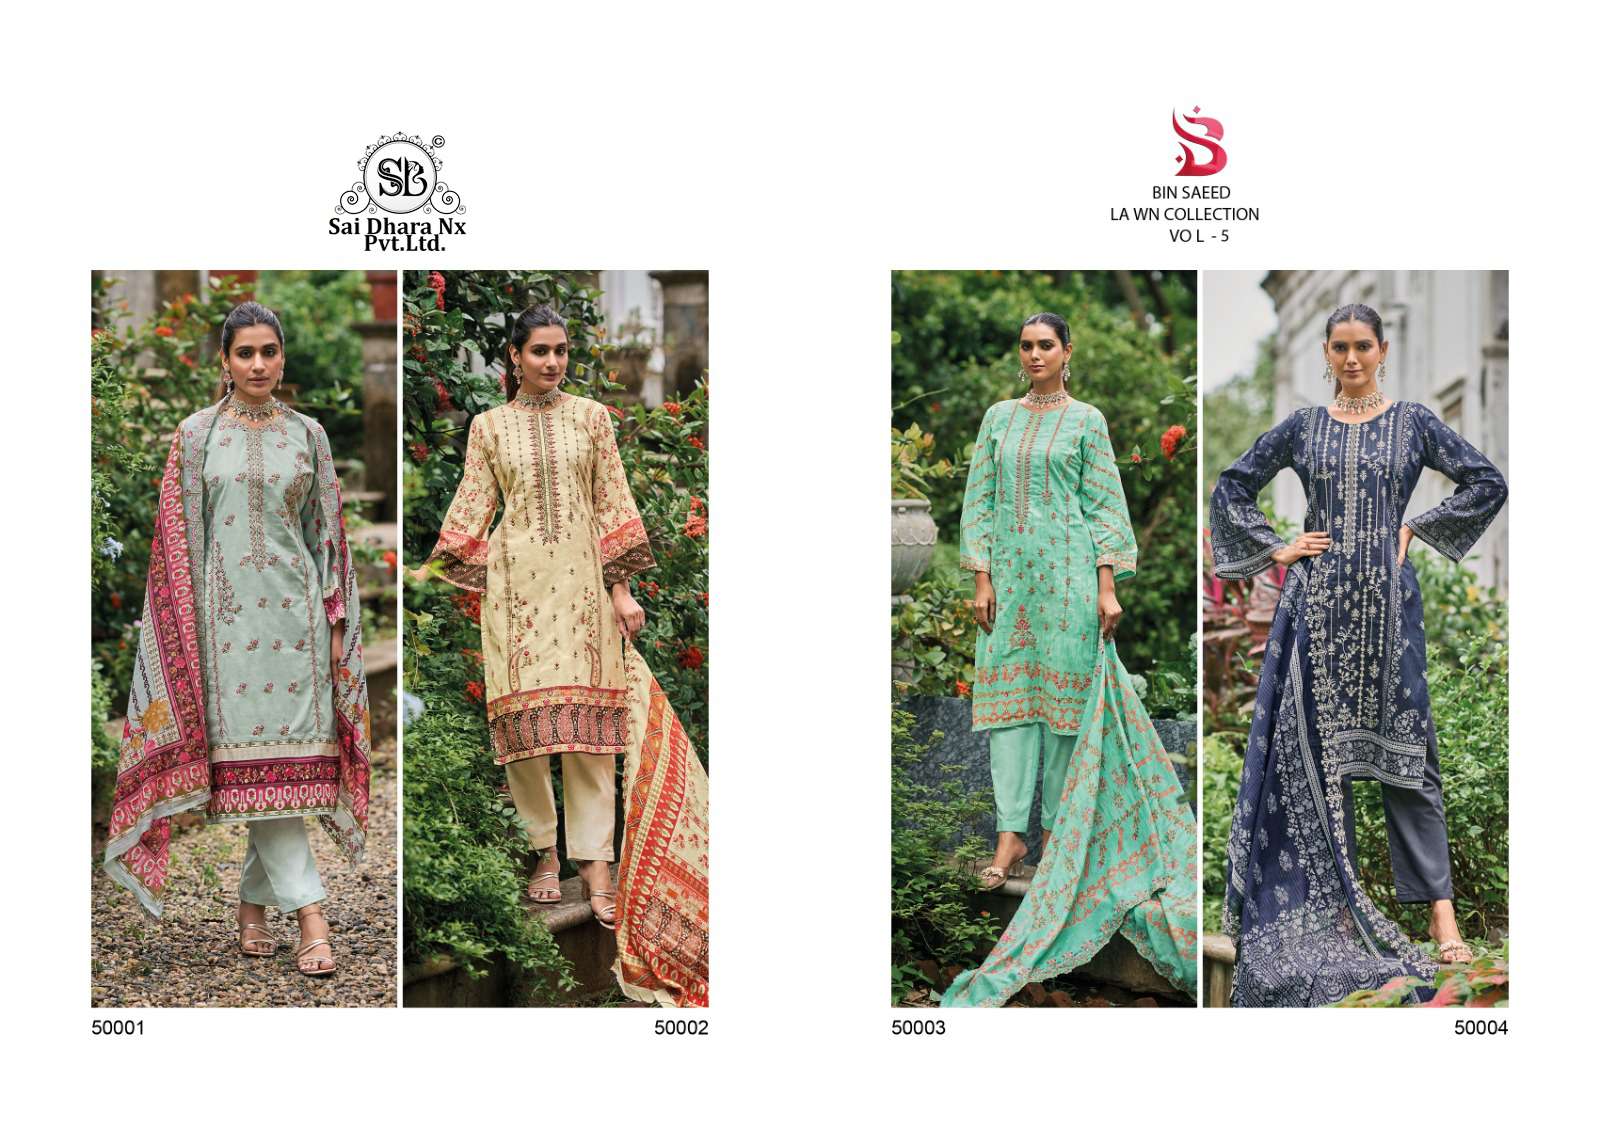 sharaddha designer presents new lawn 3 piece readymade collection wholesale shop in surat - SaiDharaNx